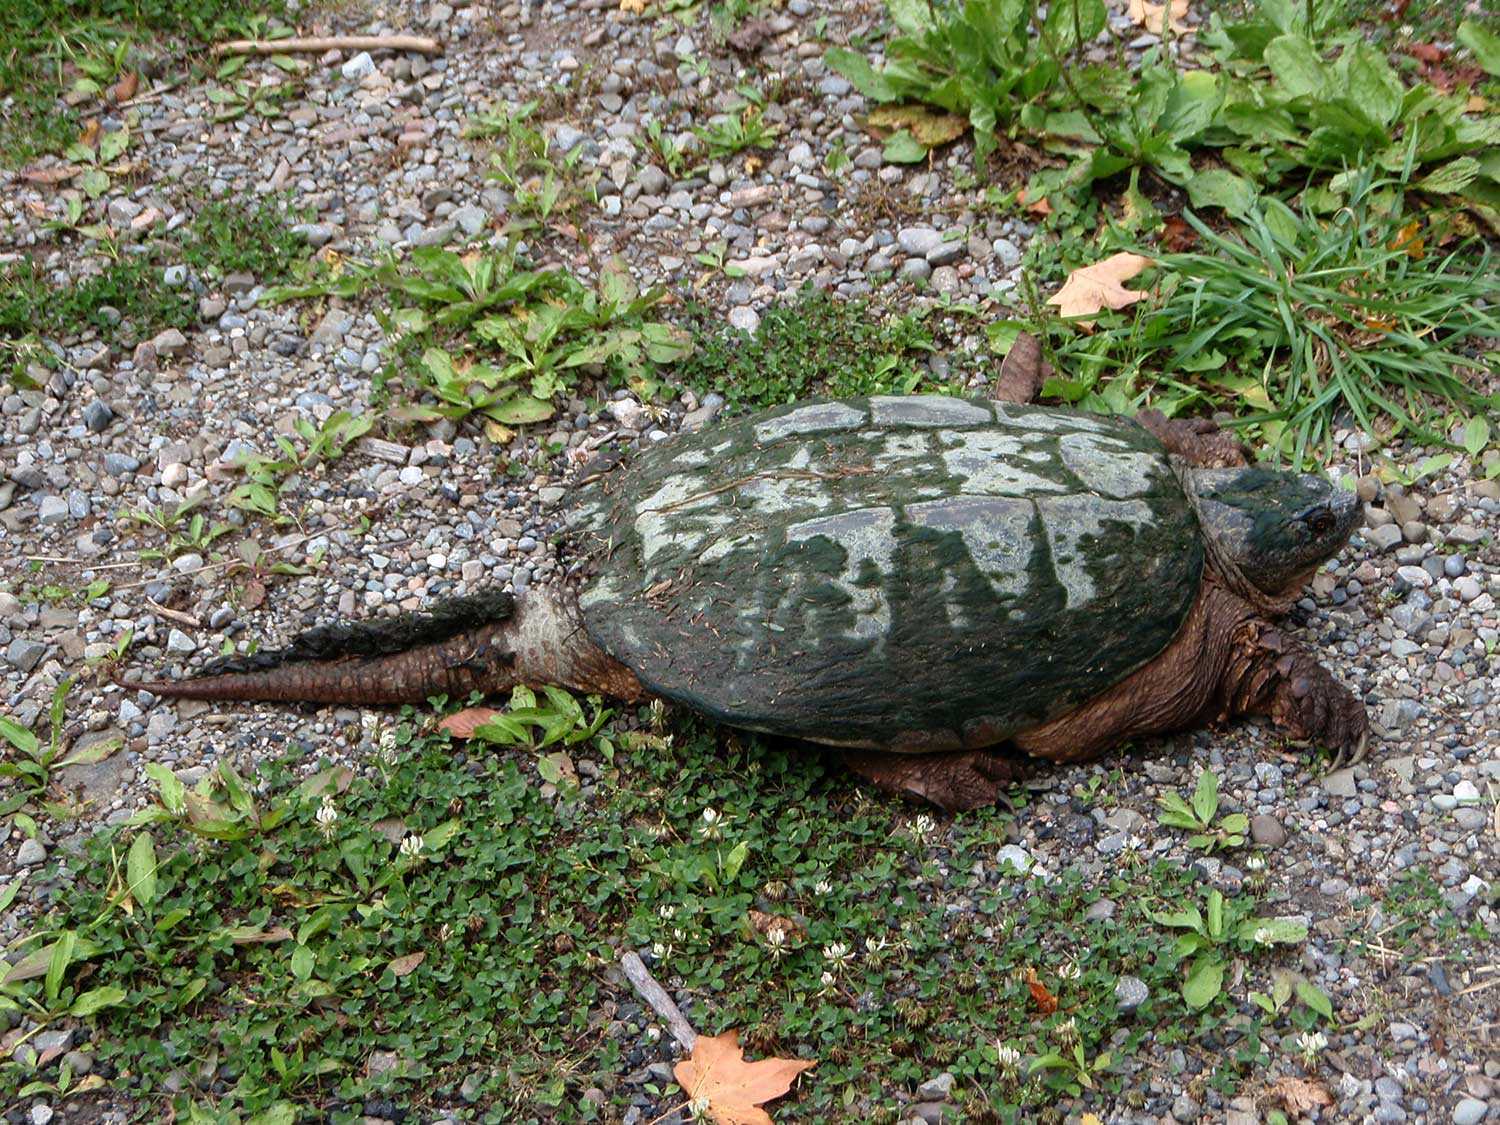 This snapping turtle at the Trust’s Scotsdale Farm is a species of special concern under Ontario’s Endangered Species Act, 2007.